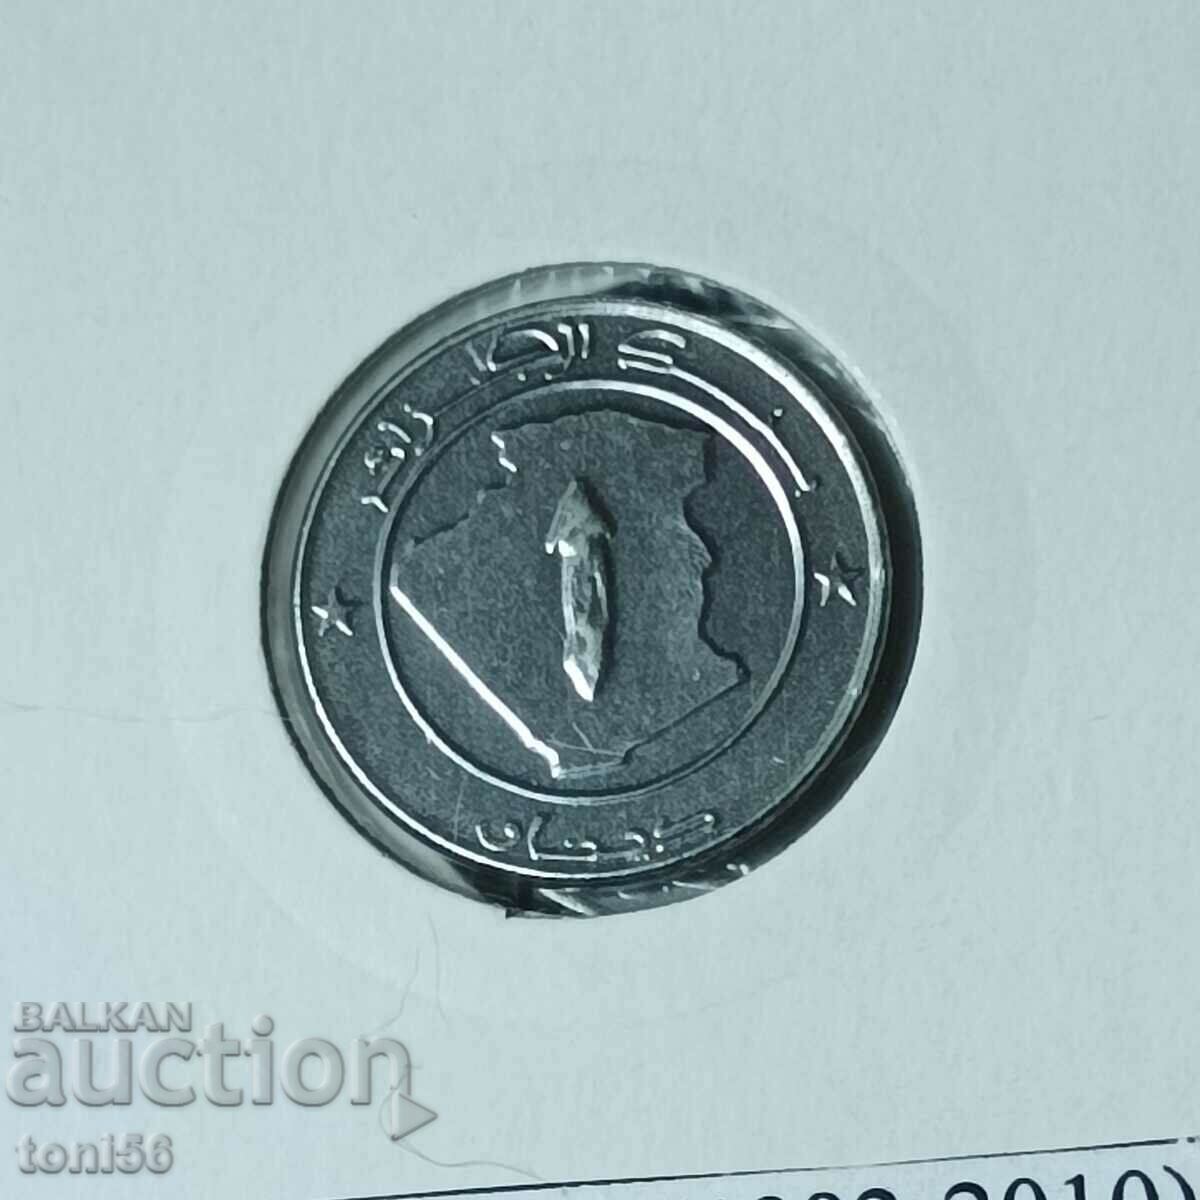 Algeria 1 Dinar 1992 UNC from Collection